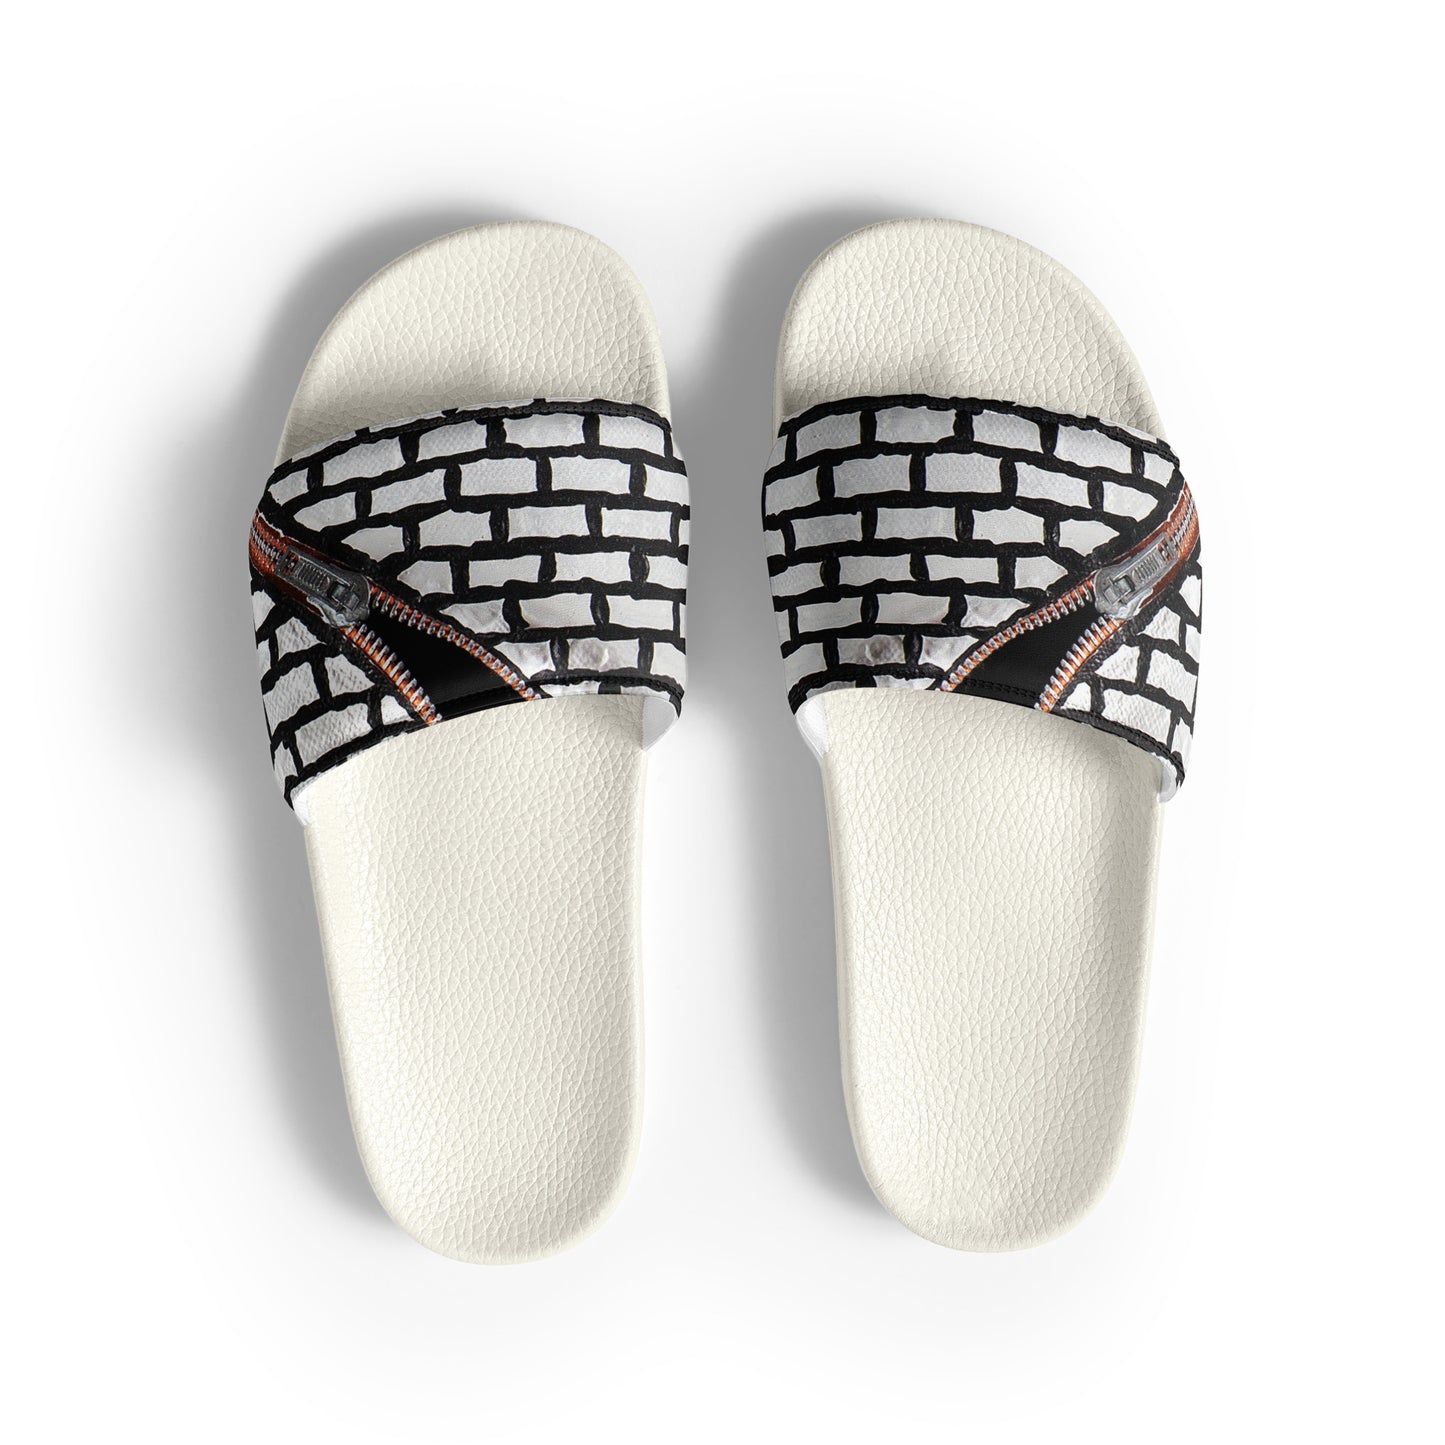 Men's sandals - Fly Wall